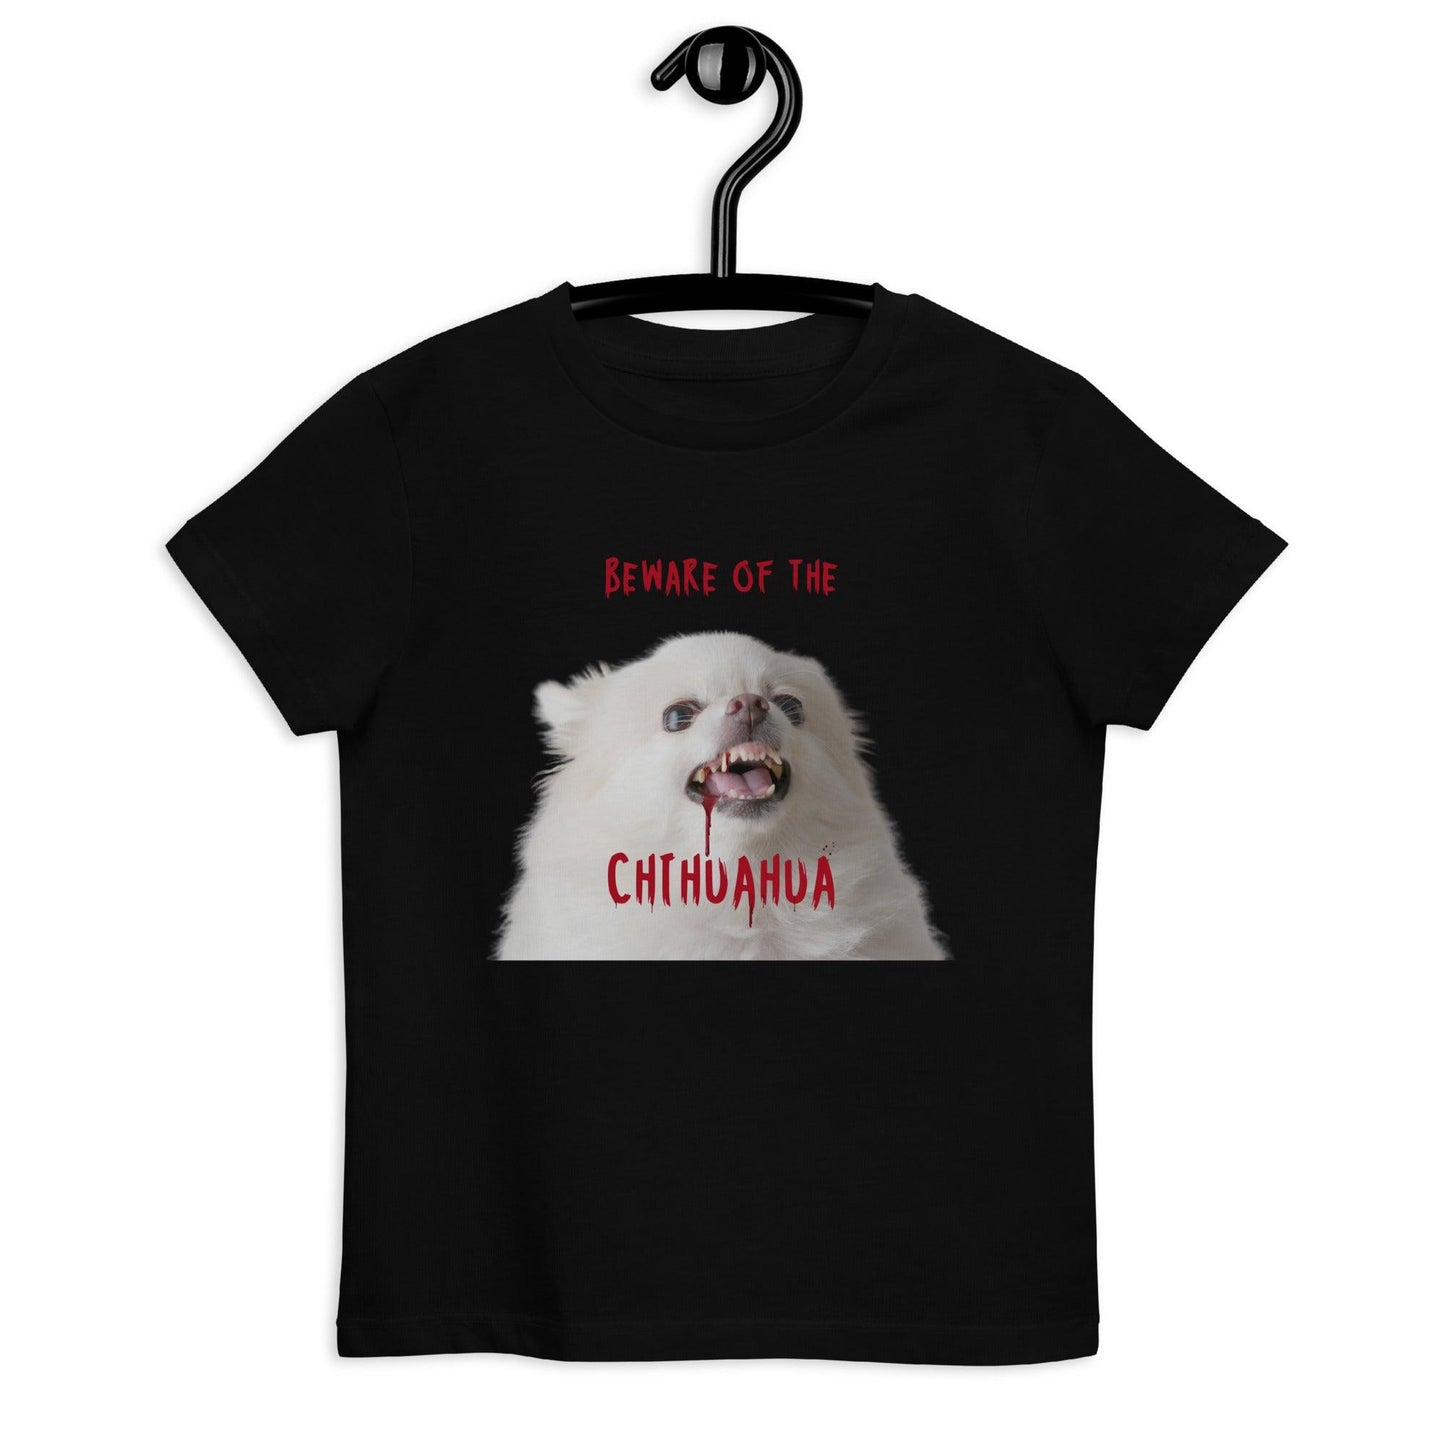 Beware of the Chihuahua - Zombie Chihuahua - organic cotton black Halloween t-shirt for kids age 3-14 years. Design by Renate Kriegler for Chimigos.